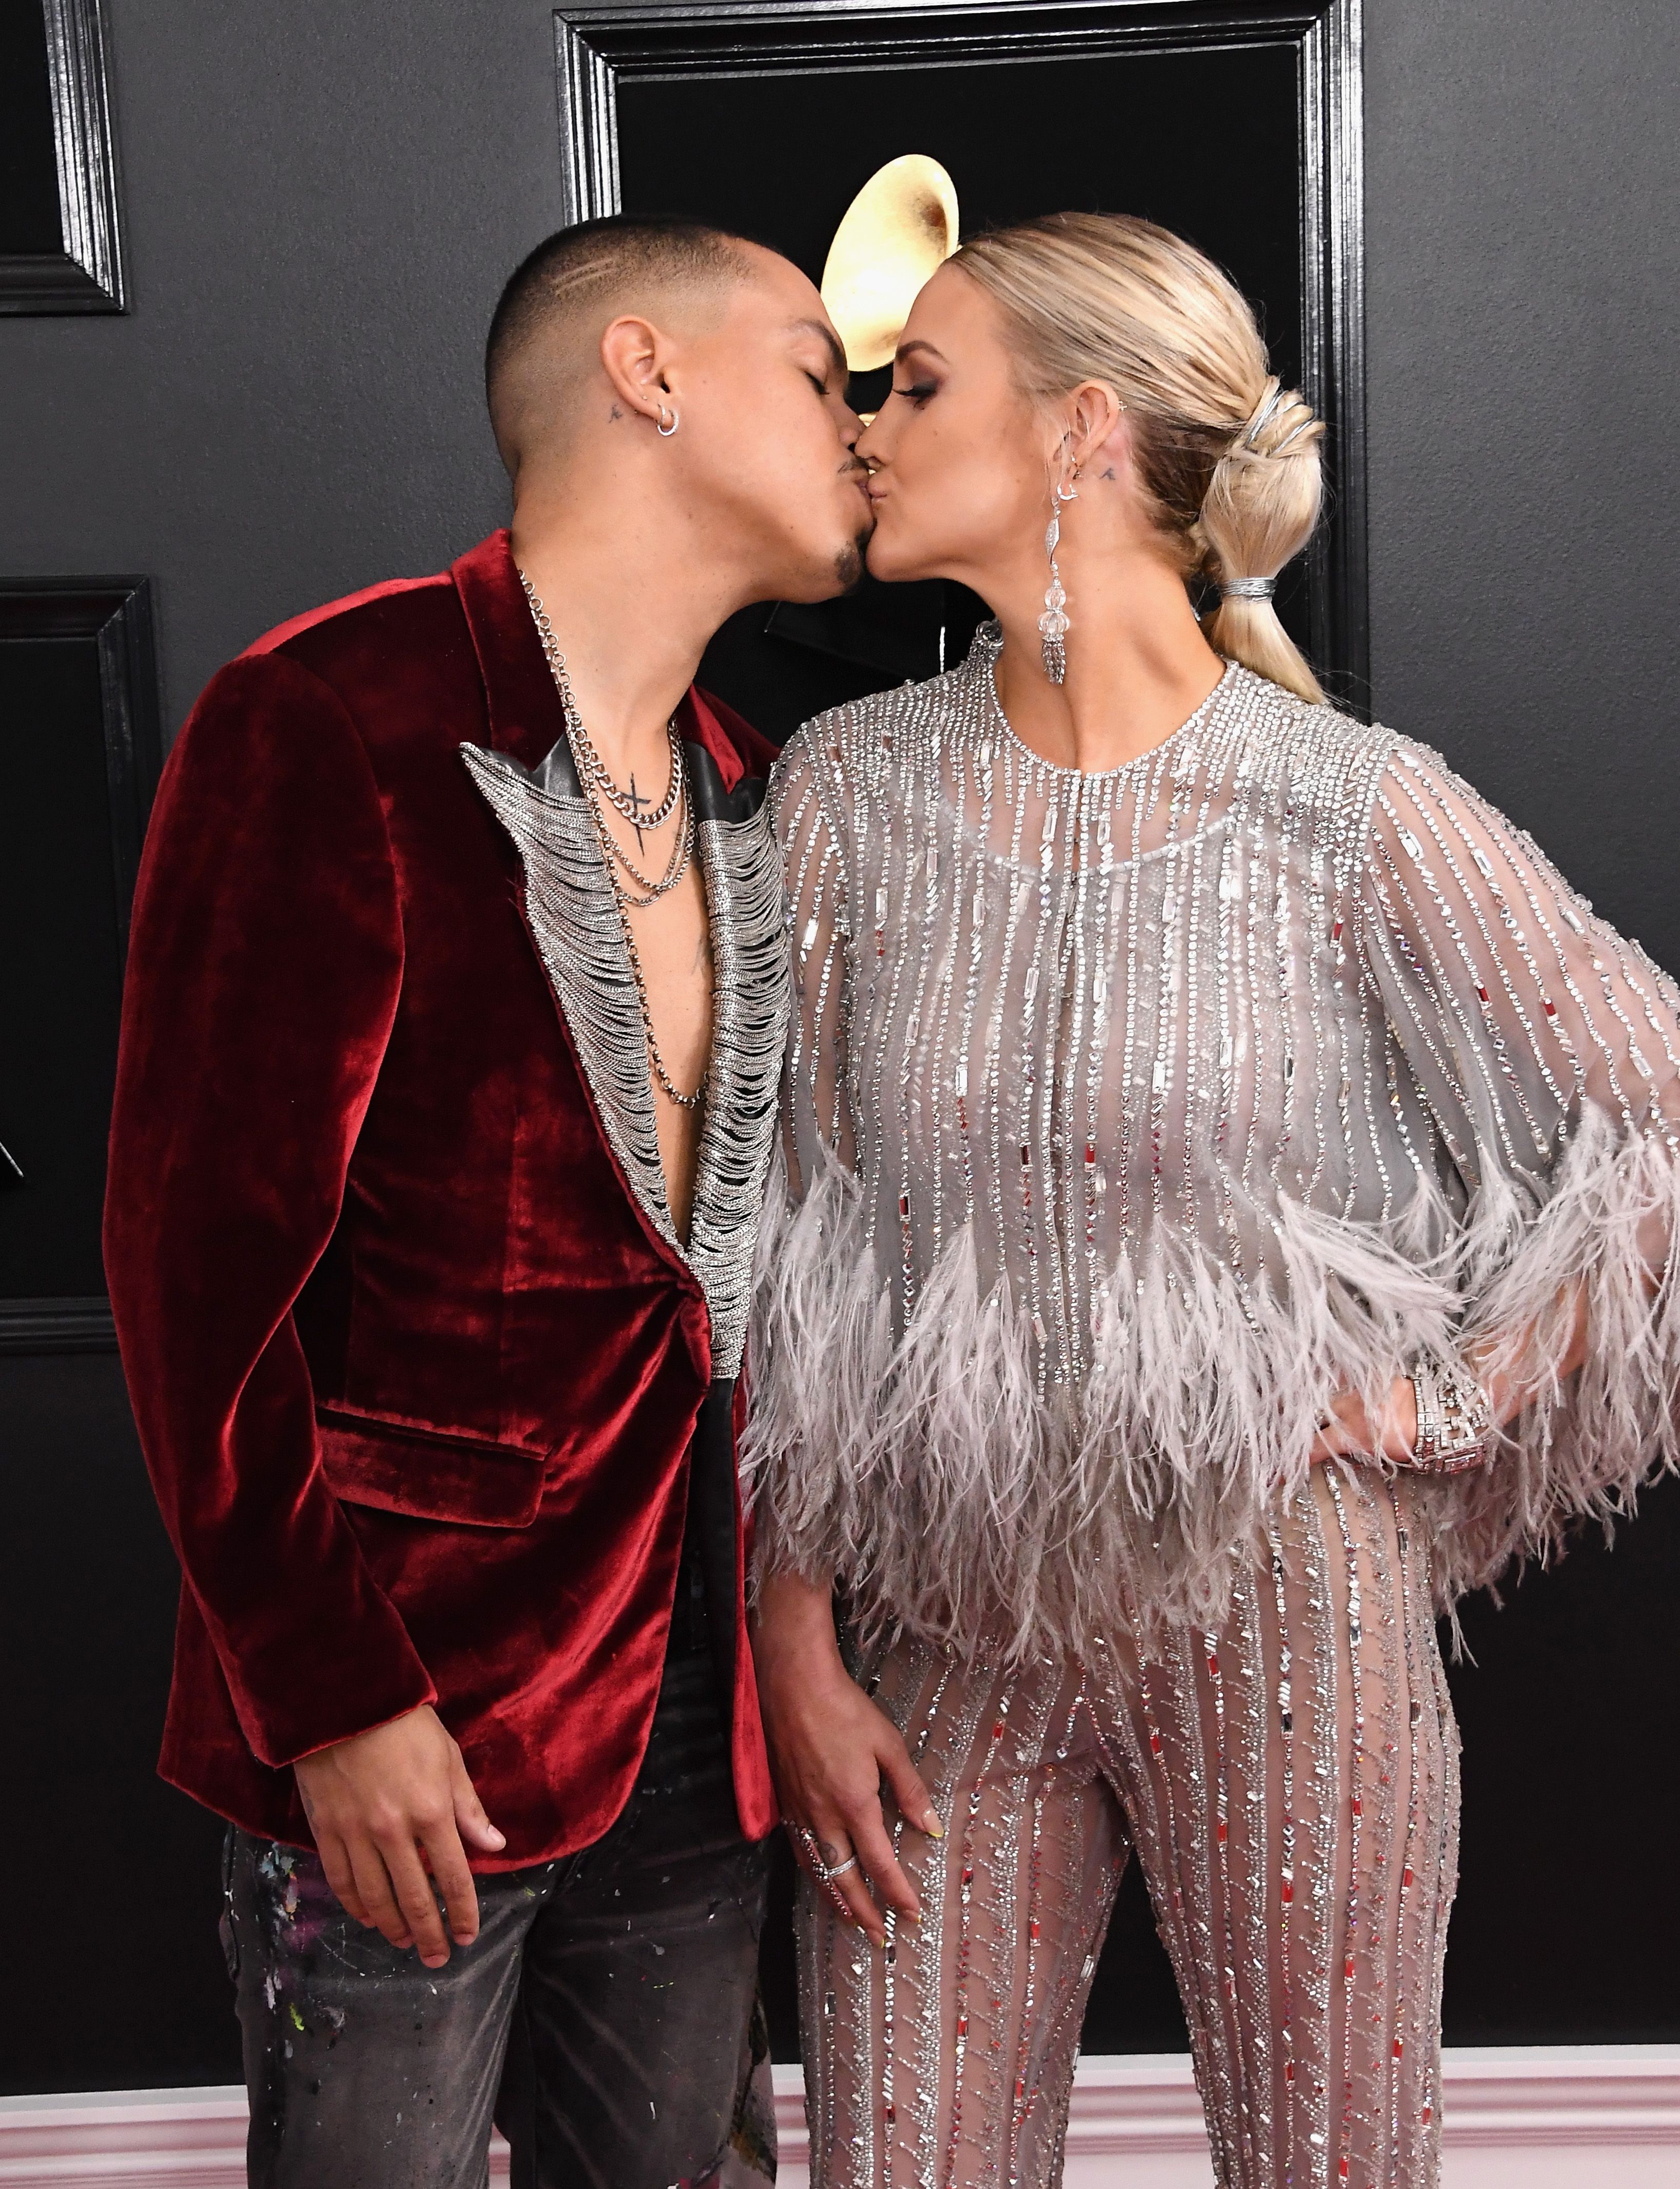 8 Couples Showing Major PDA on the 2019 Grammys Red Carpet